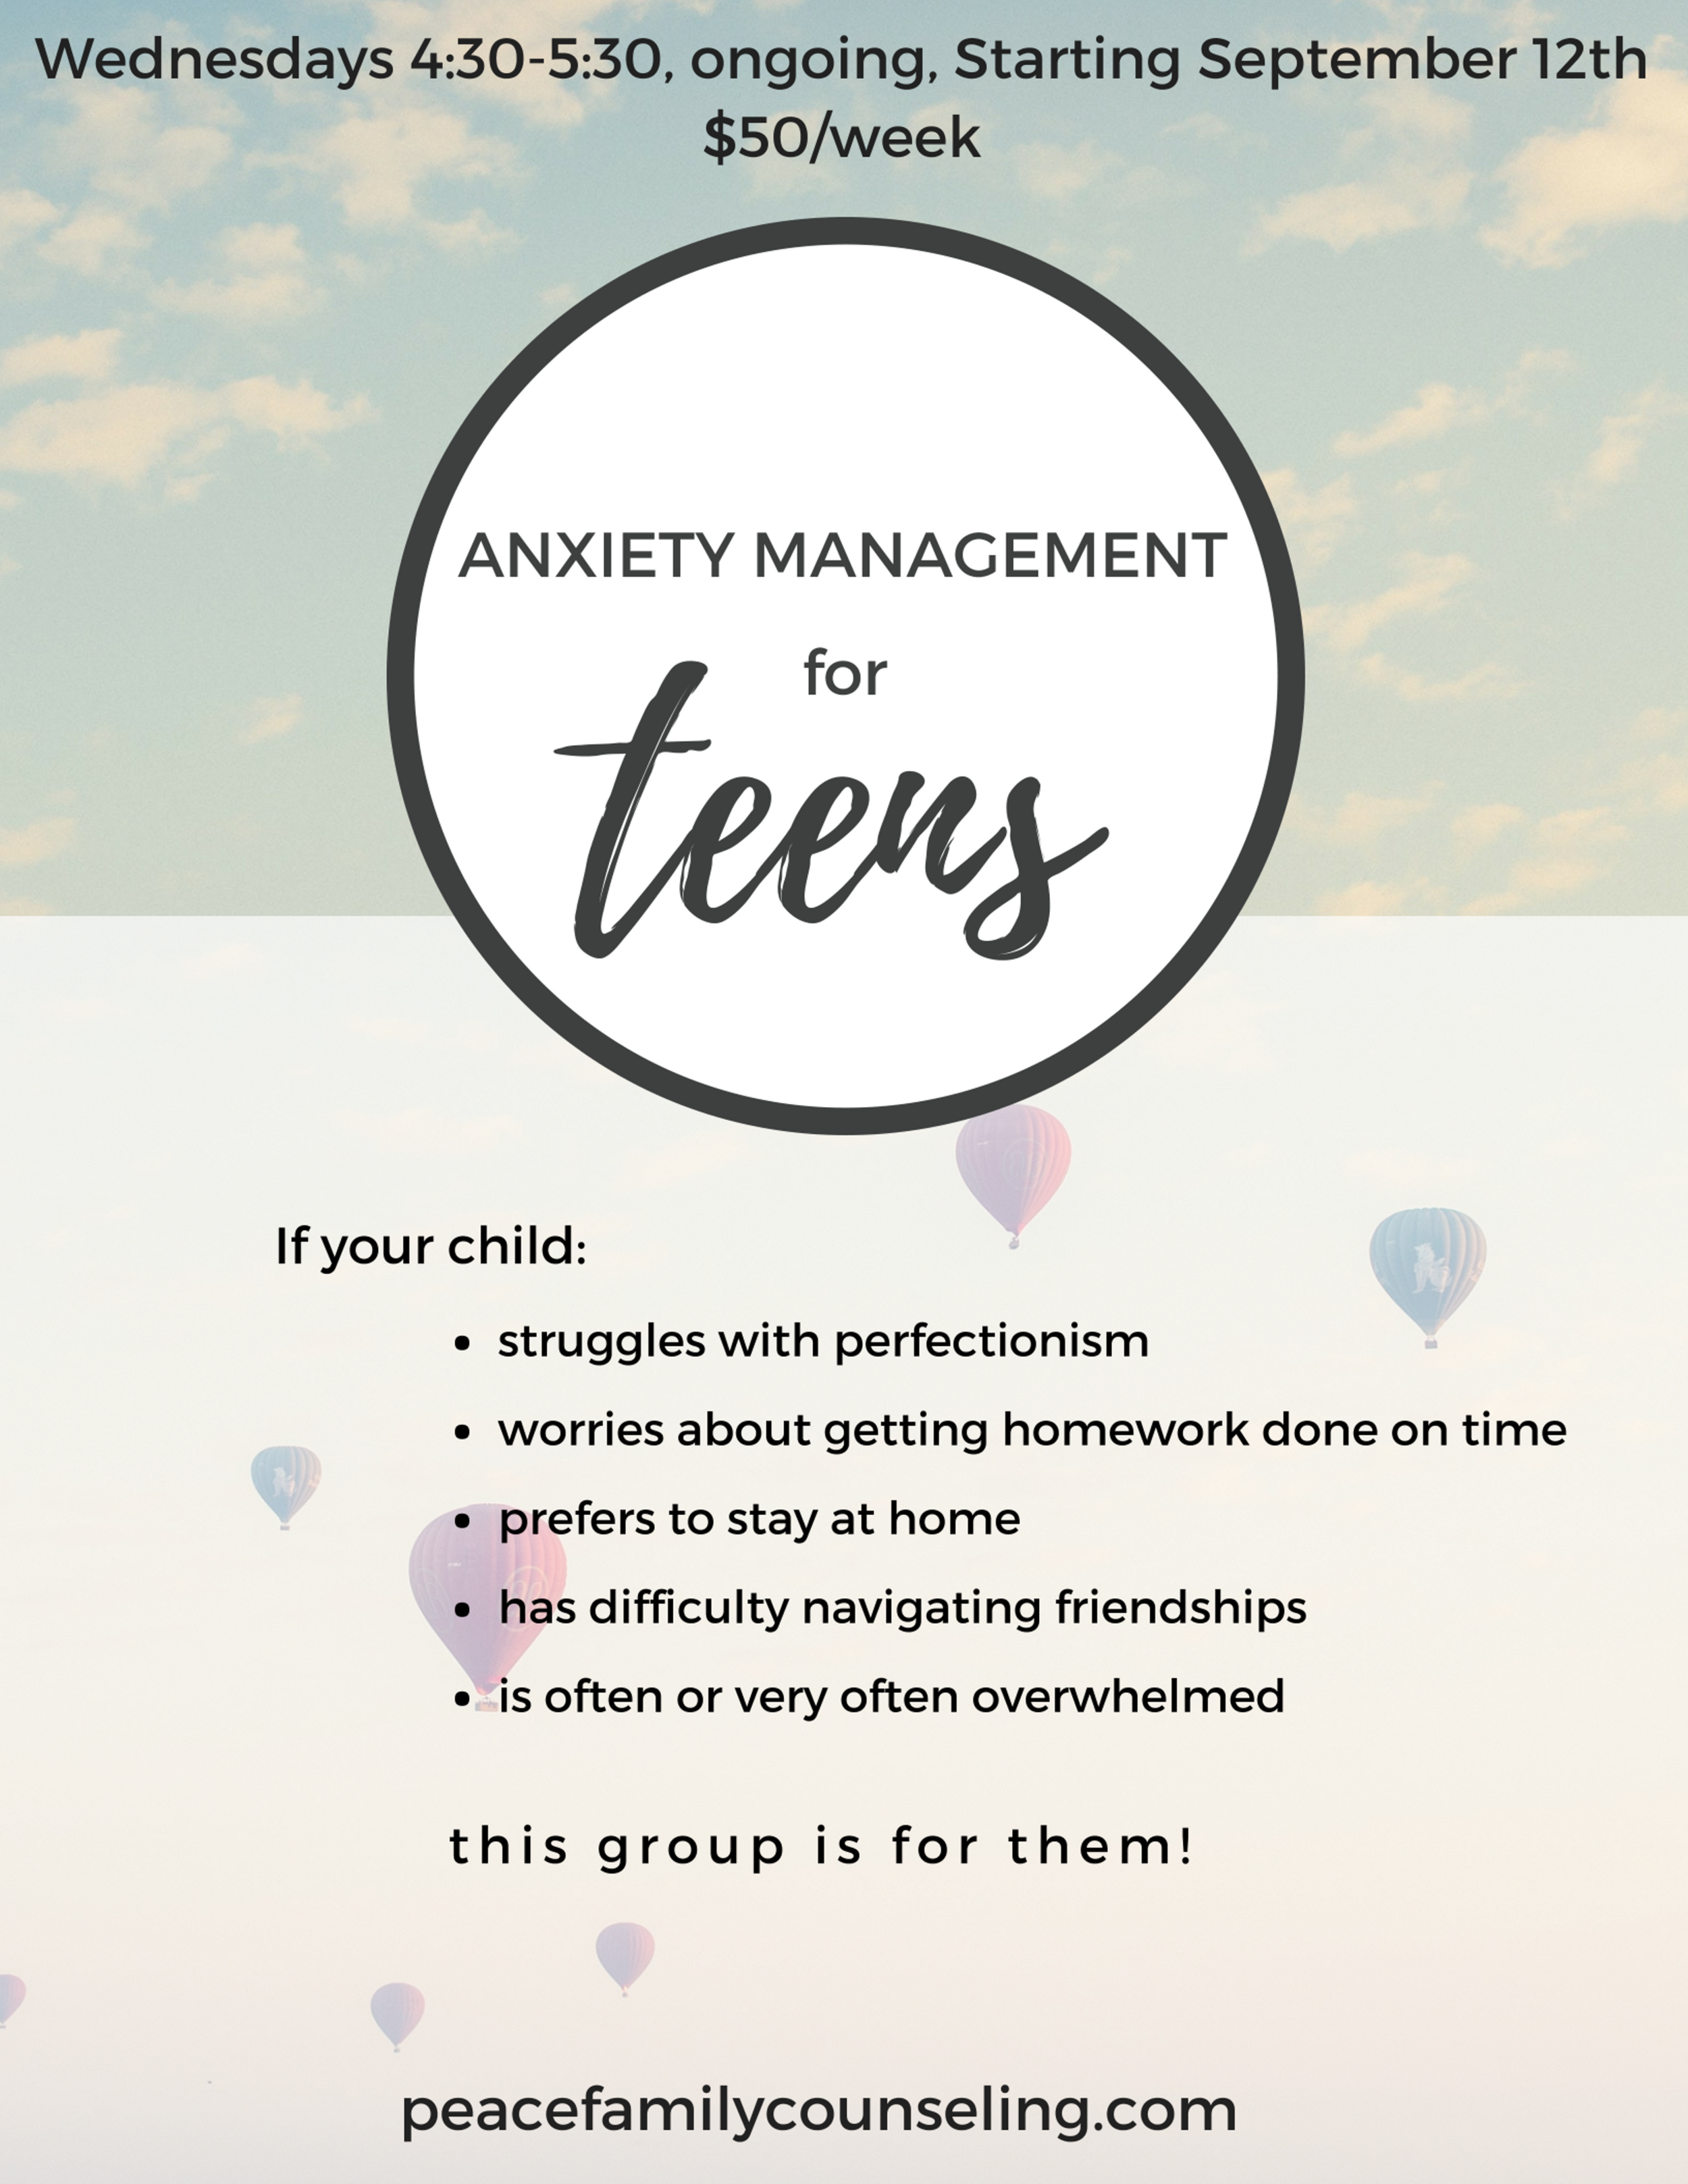 anxiety management for teens- poster final.png